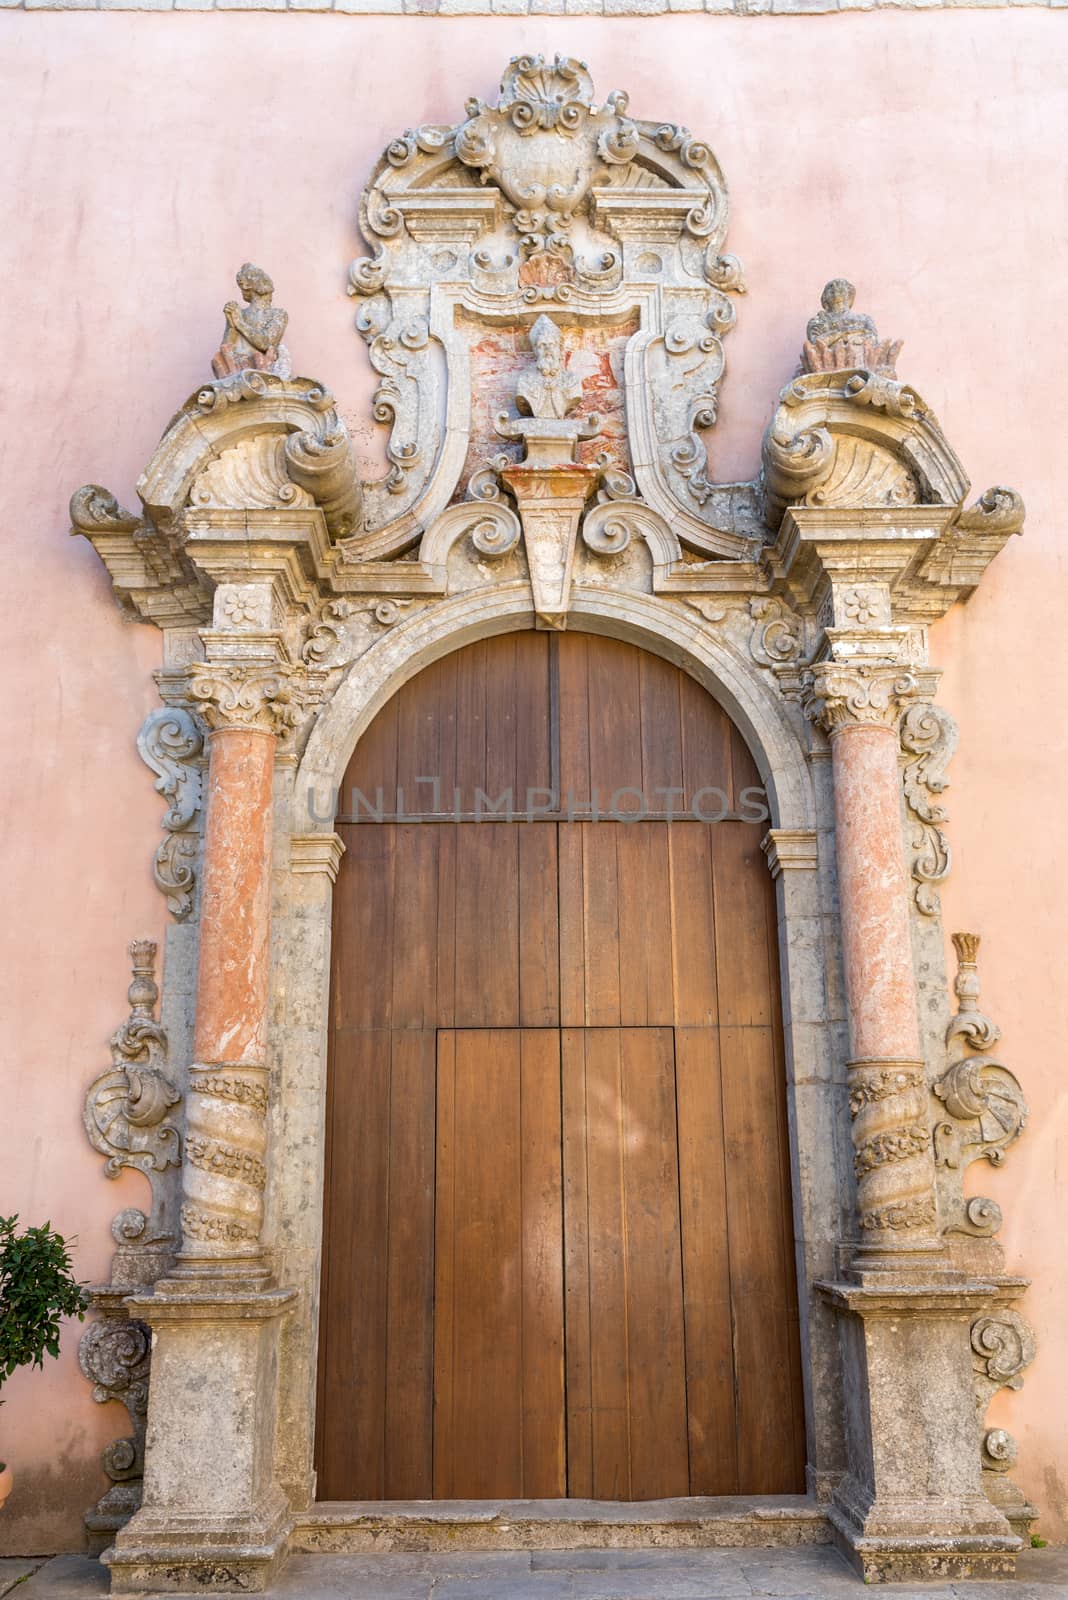 An ornated old door seen on Erice, Sicily